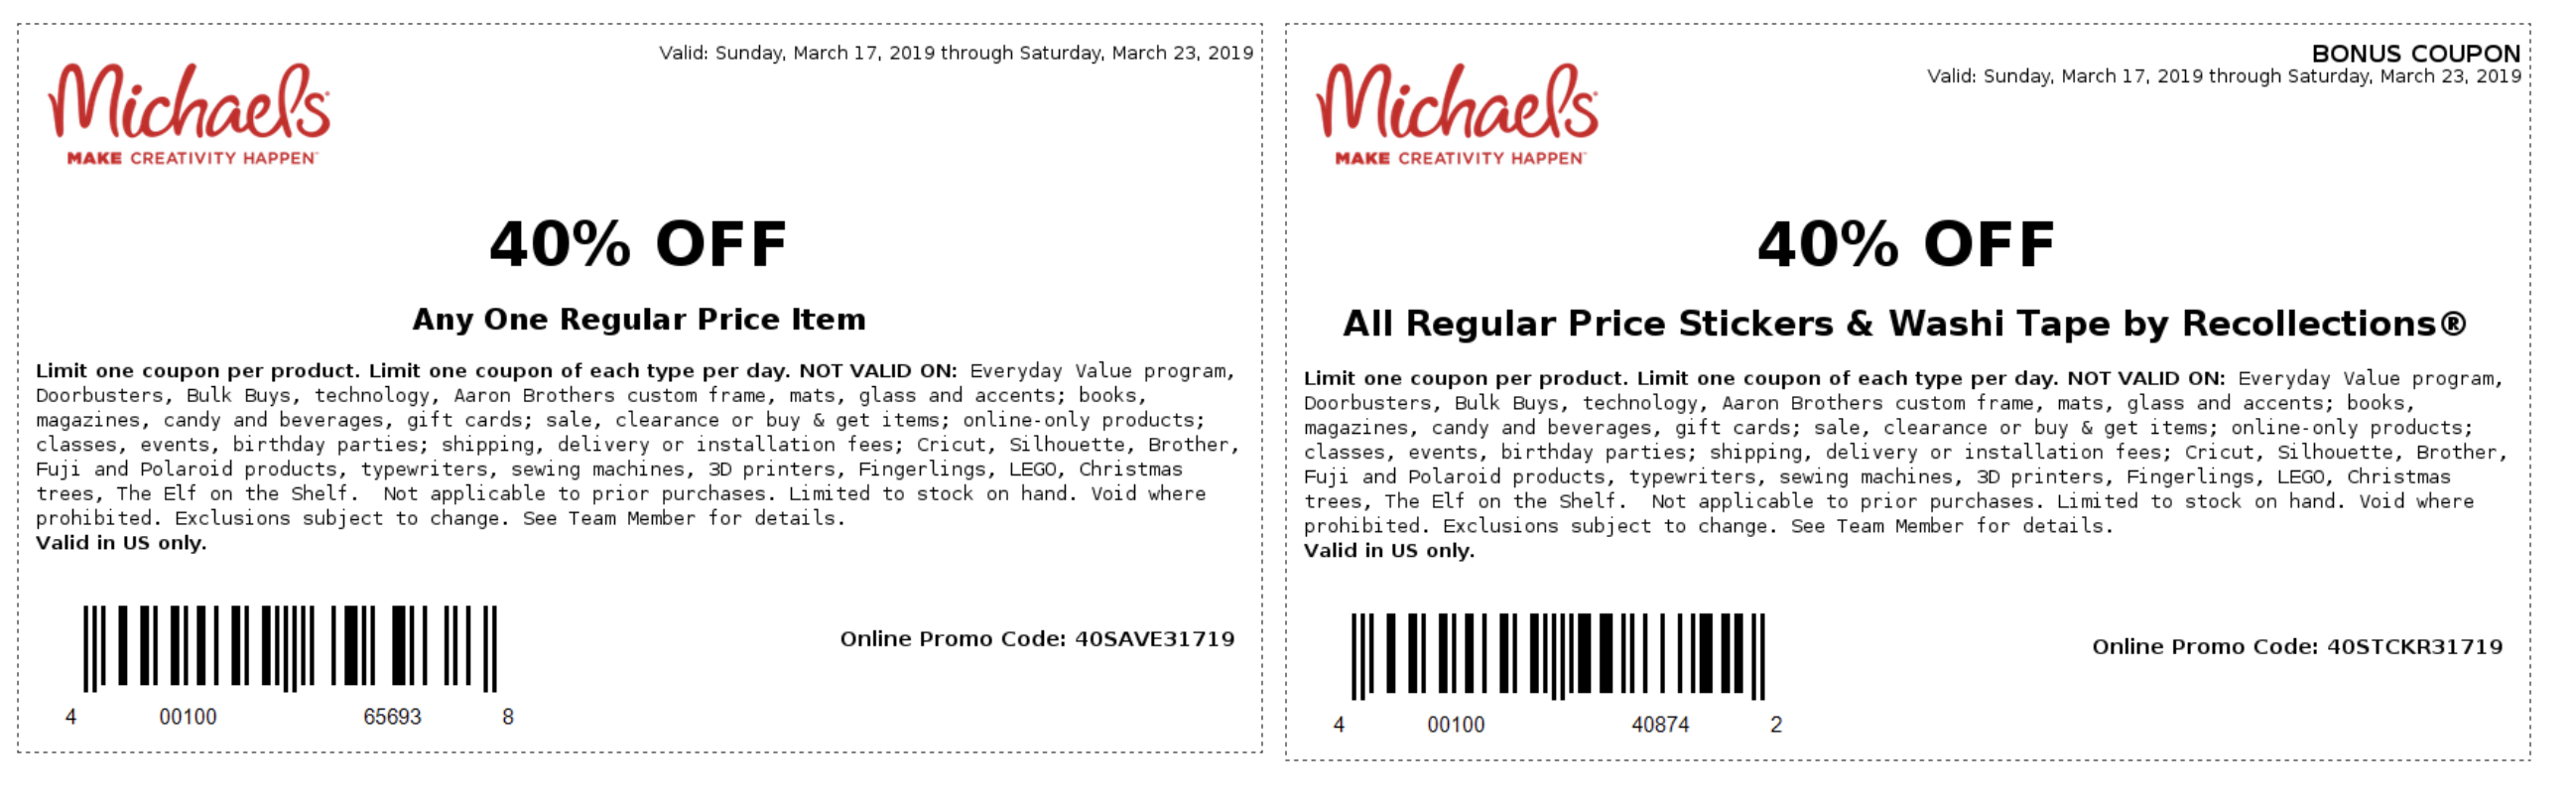 Michaels Coupons In Store (Printable Coupons) - 2019 - Free Printable Michaels Coupons